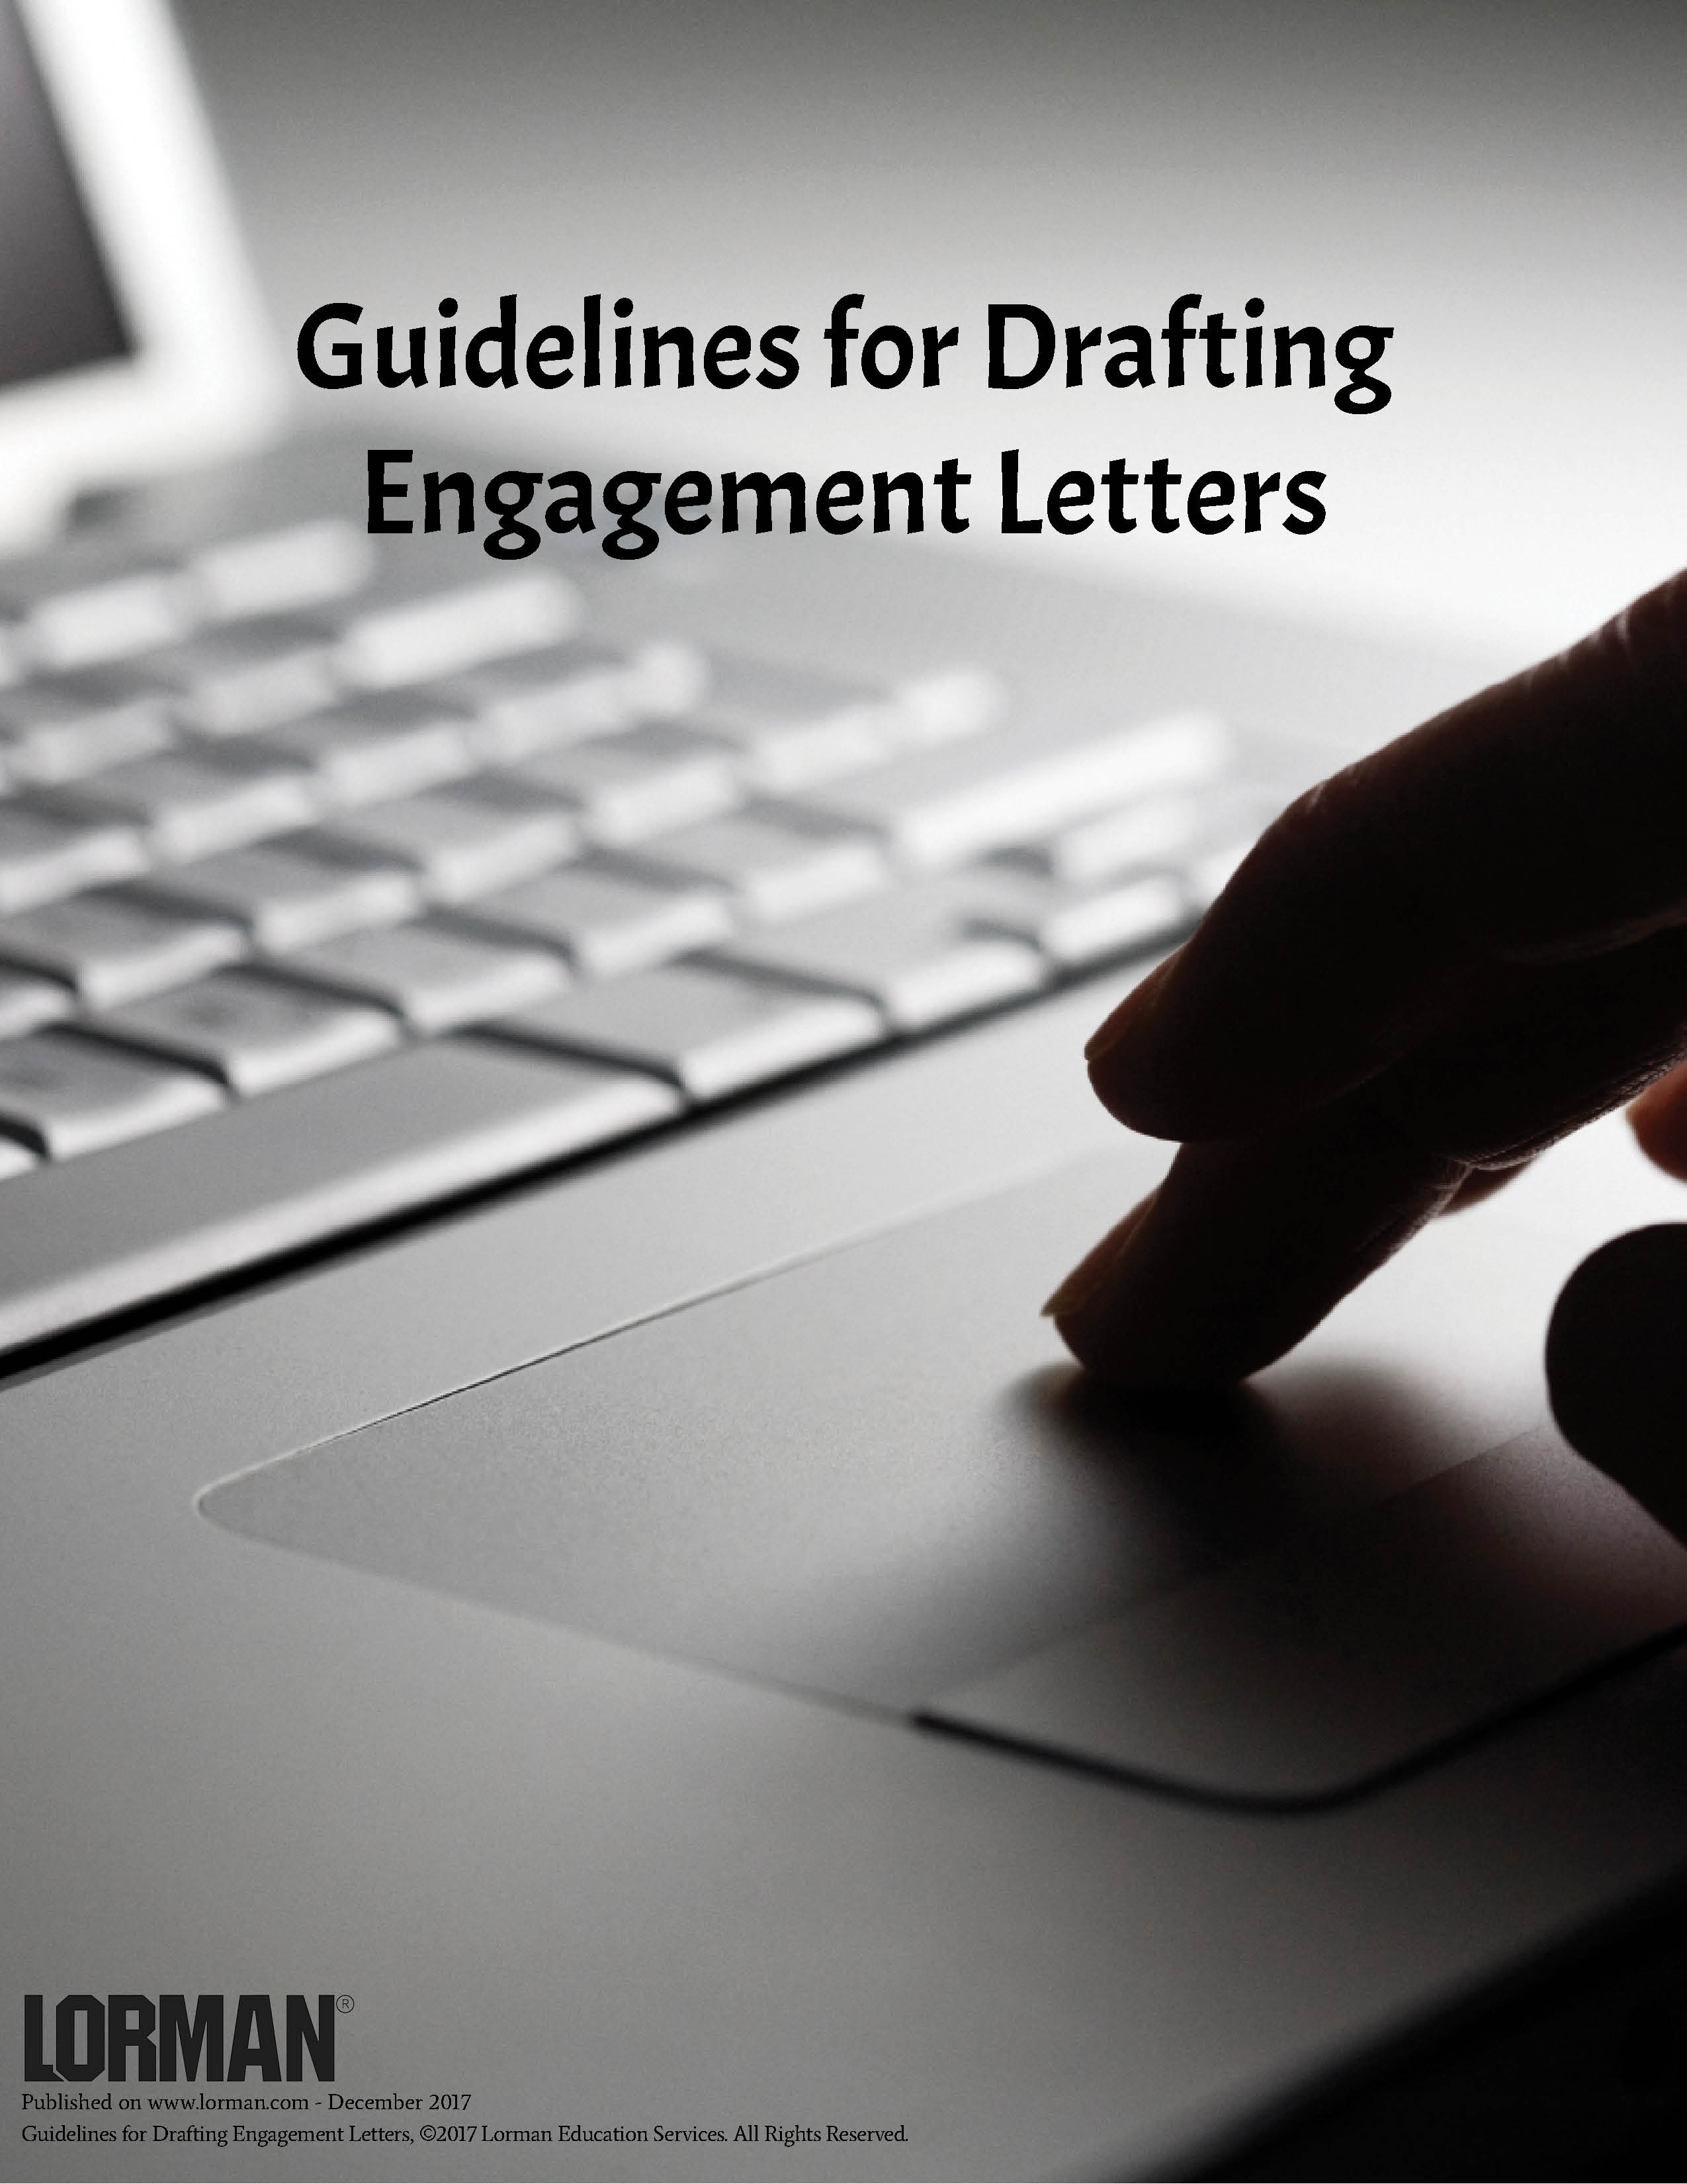 Guidelines for Drafting Engagement Letters